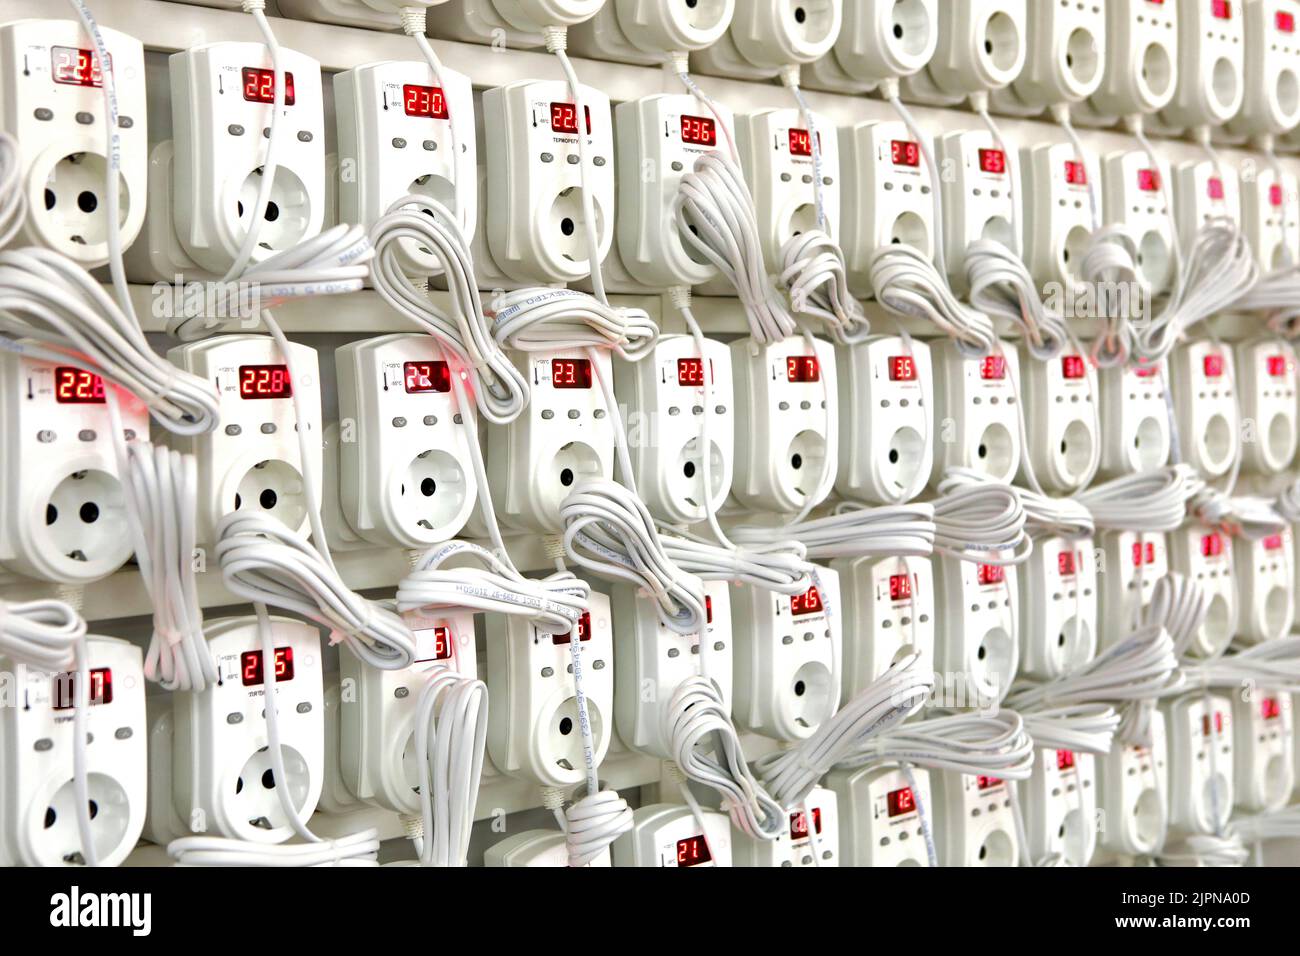 Quality control of electronic devices at the stand. Manufacture of sockets volt control and quality control. Lots of flashing electrical devices Stock Photo